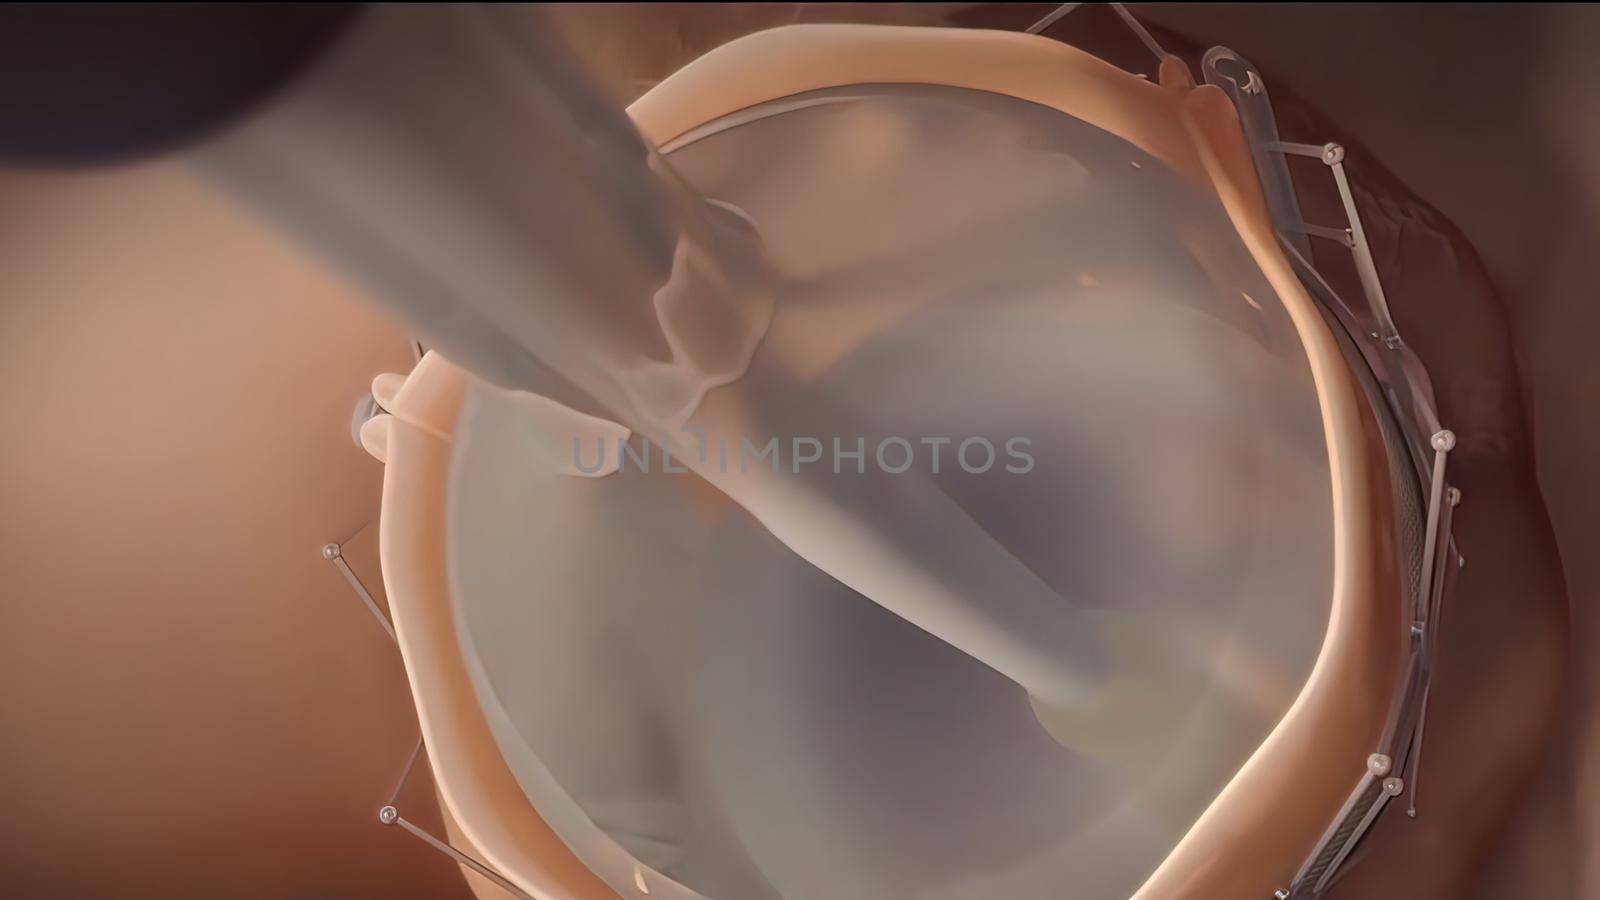 An artificial heart valve is inserted instead of a dysfunctional heart valve. by creativepic